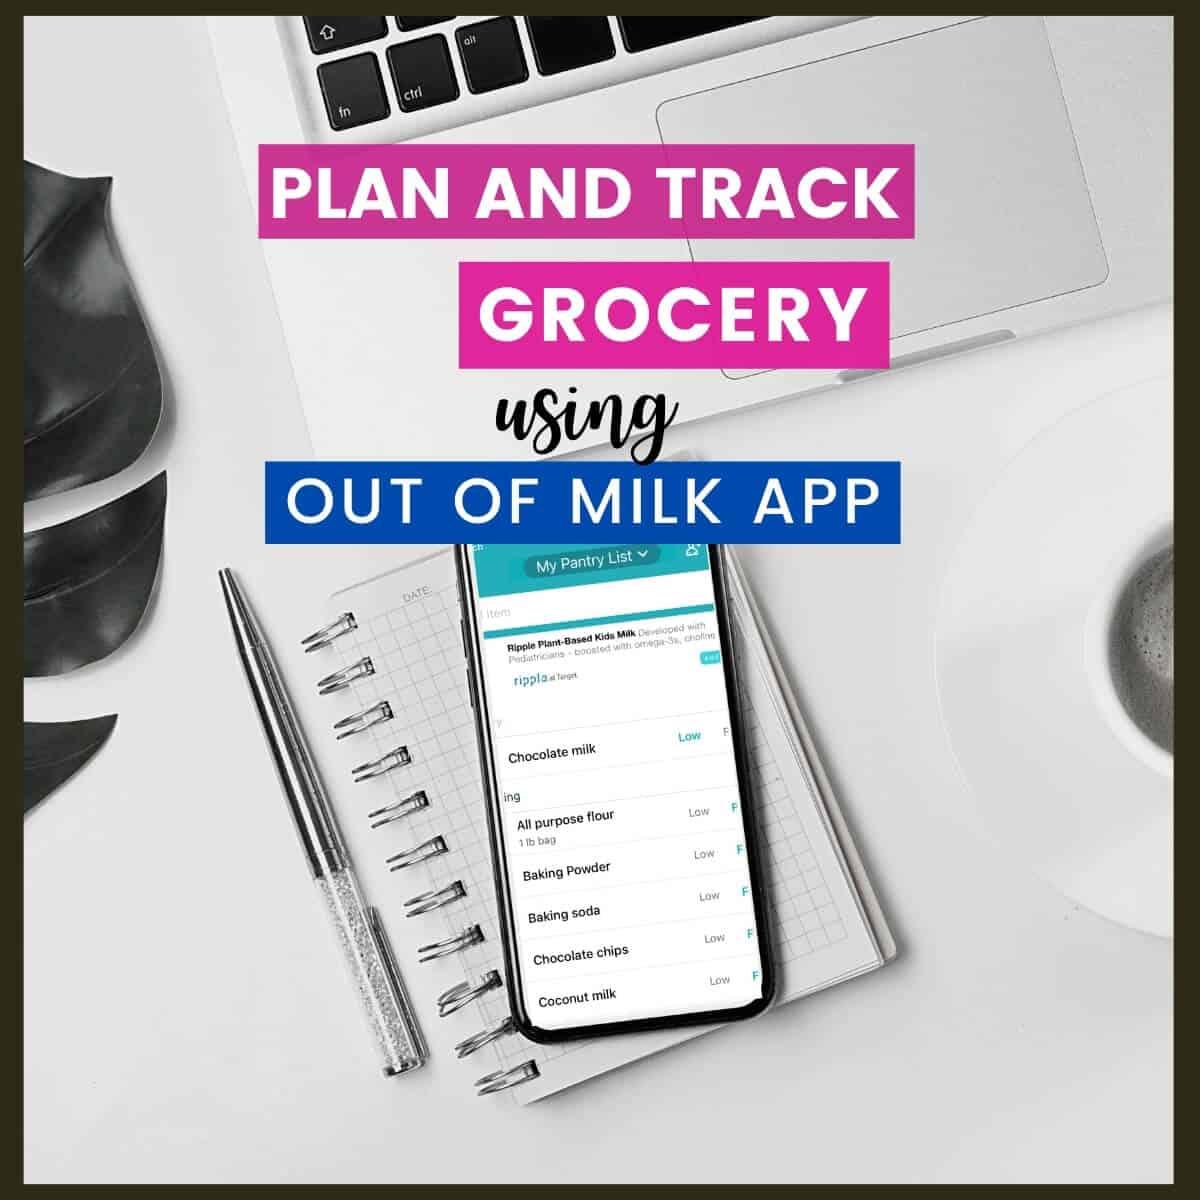 How to use the Out of milk app for grocery lists